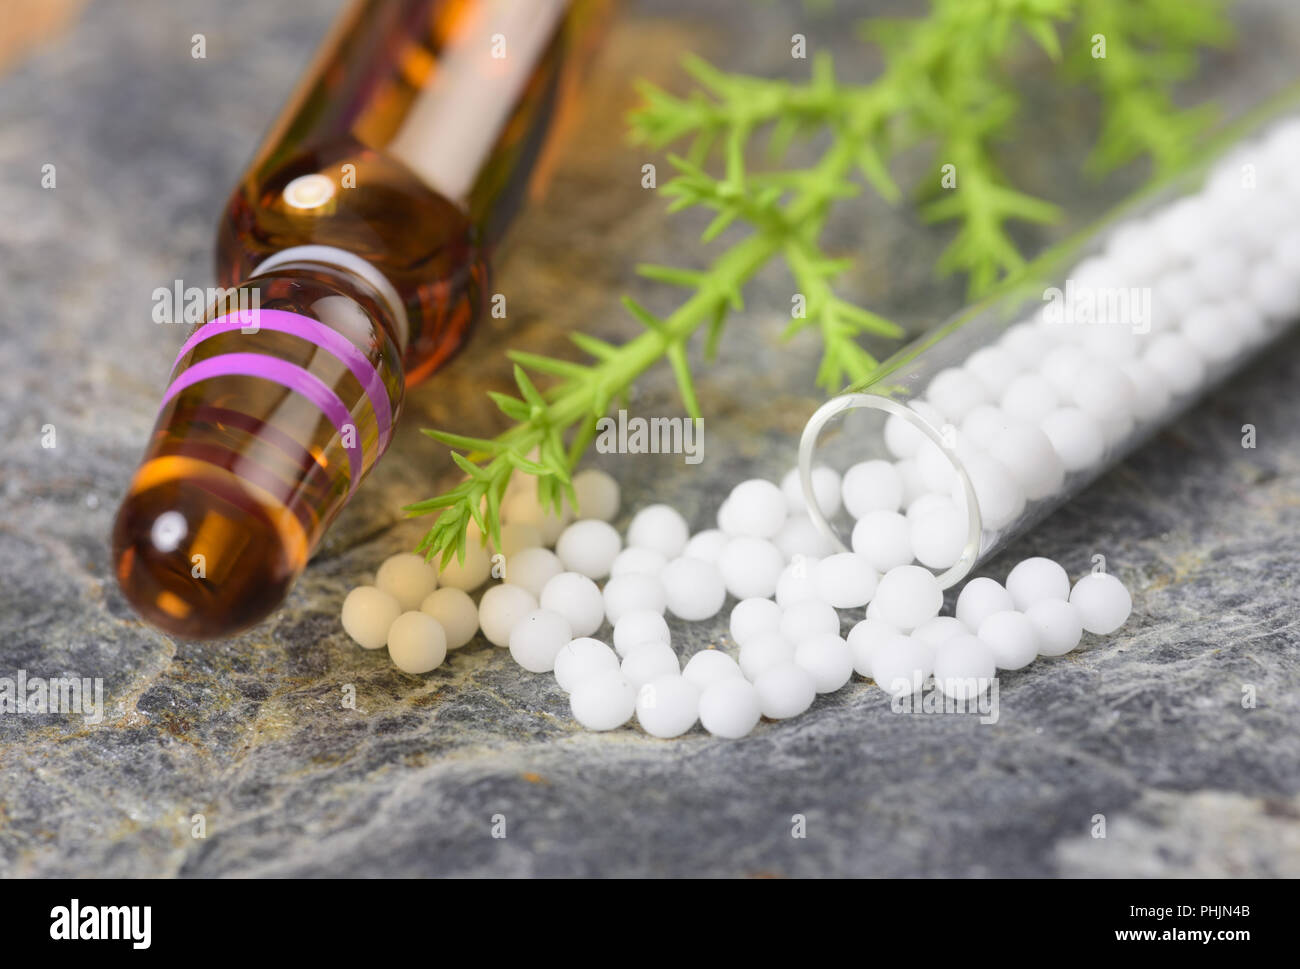 alternative medicine with homeopathic and herbal pills Stock Photo